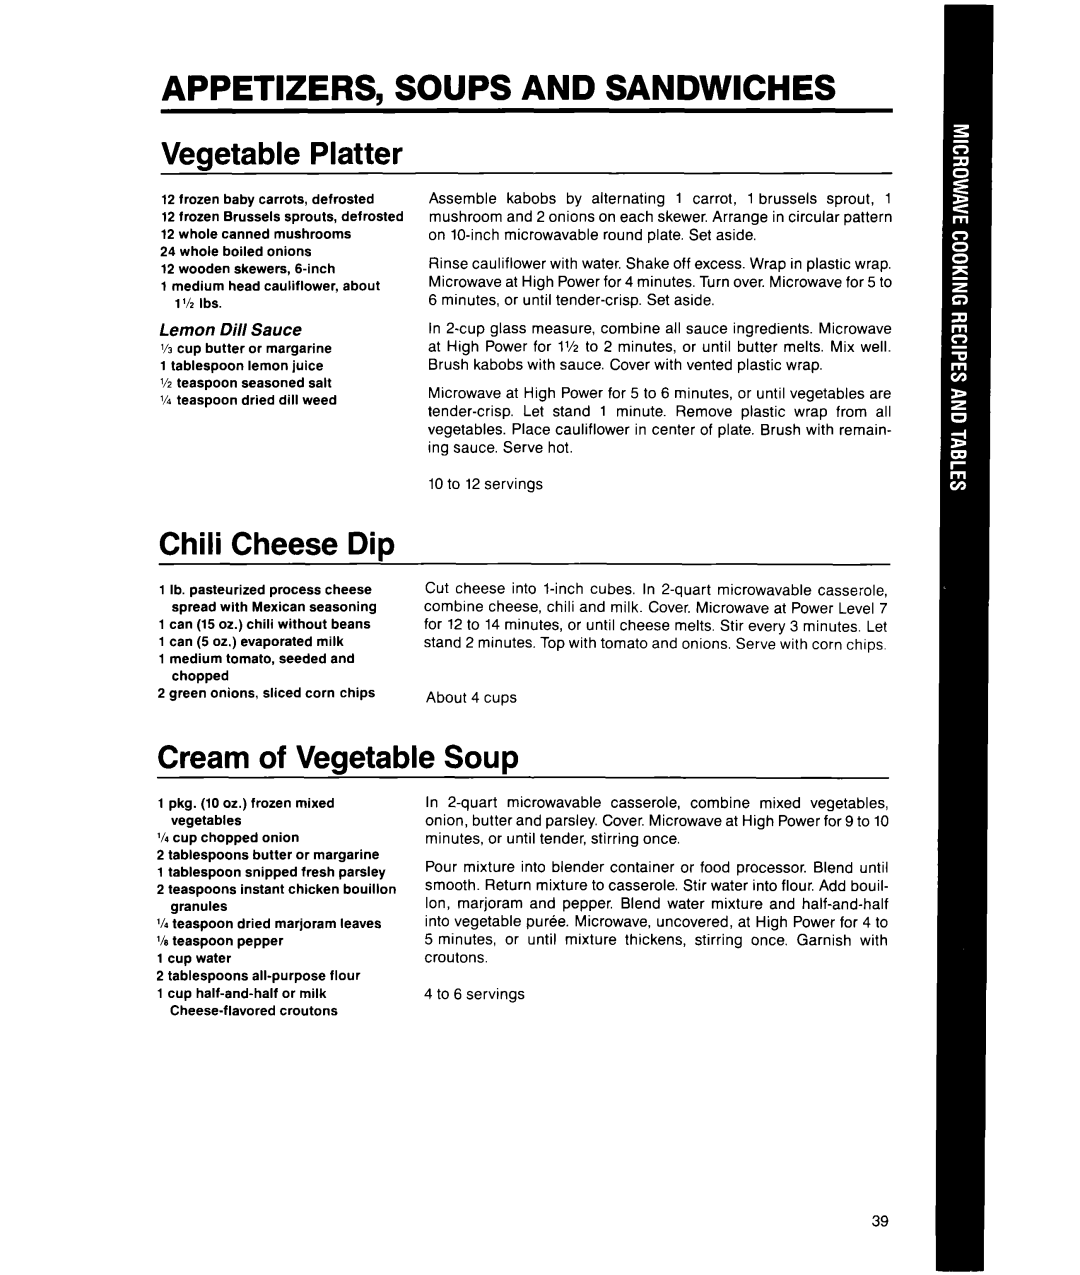 Whirlpool MS1451XWI manual Appetizers, Soups And Sandwiches, Vegetable Platter, Chili Cheese Dip, Cream of Vegetable Soup 